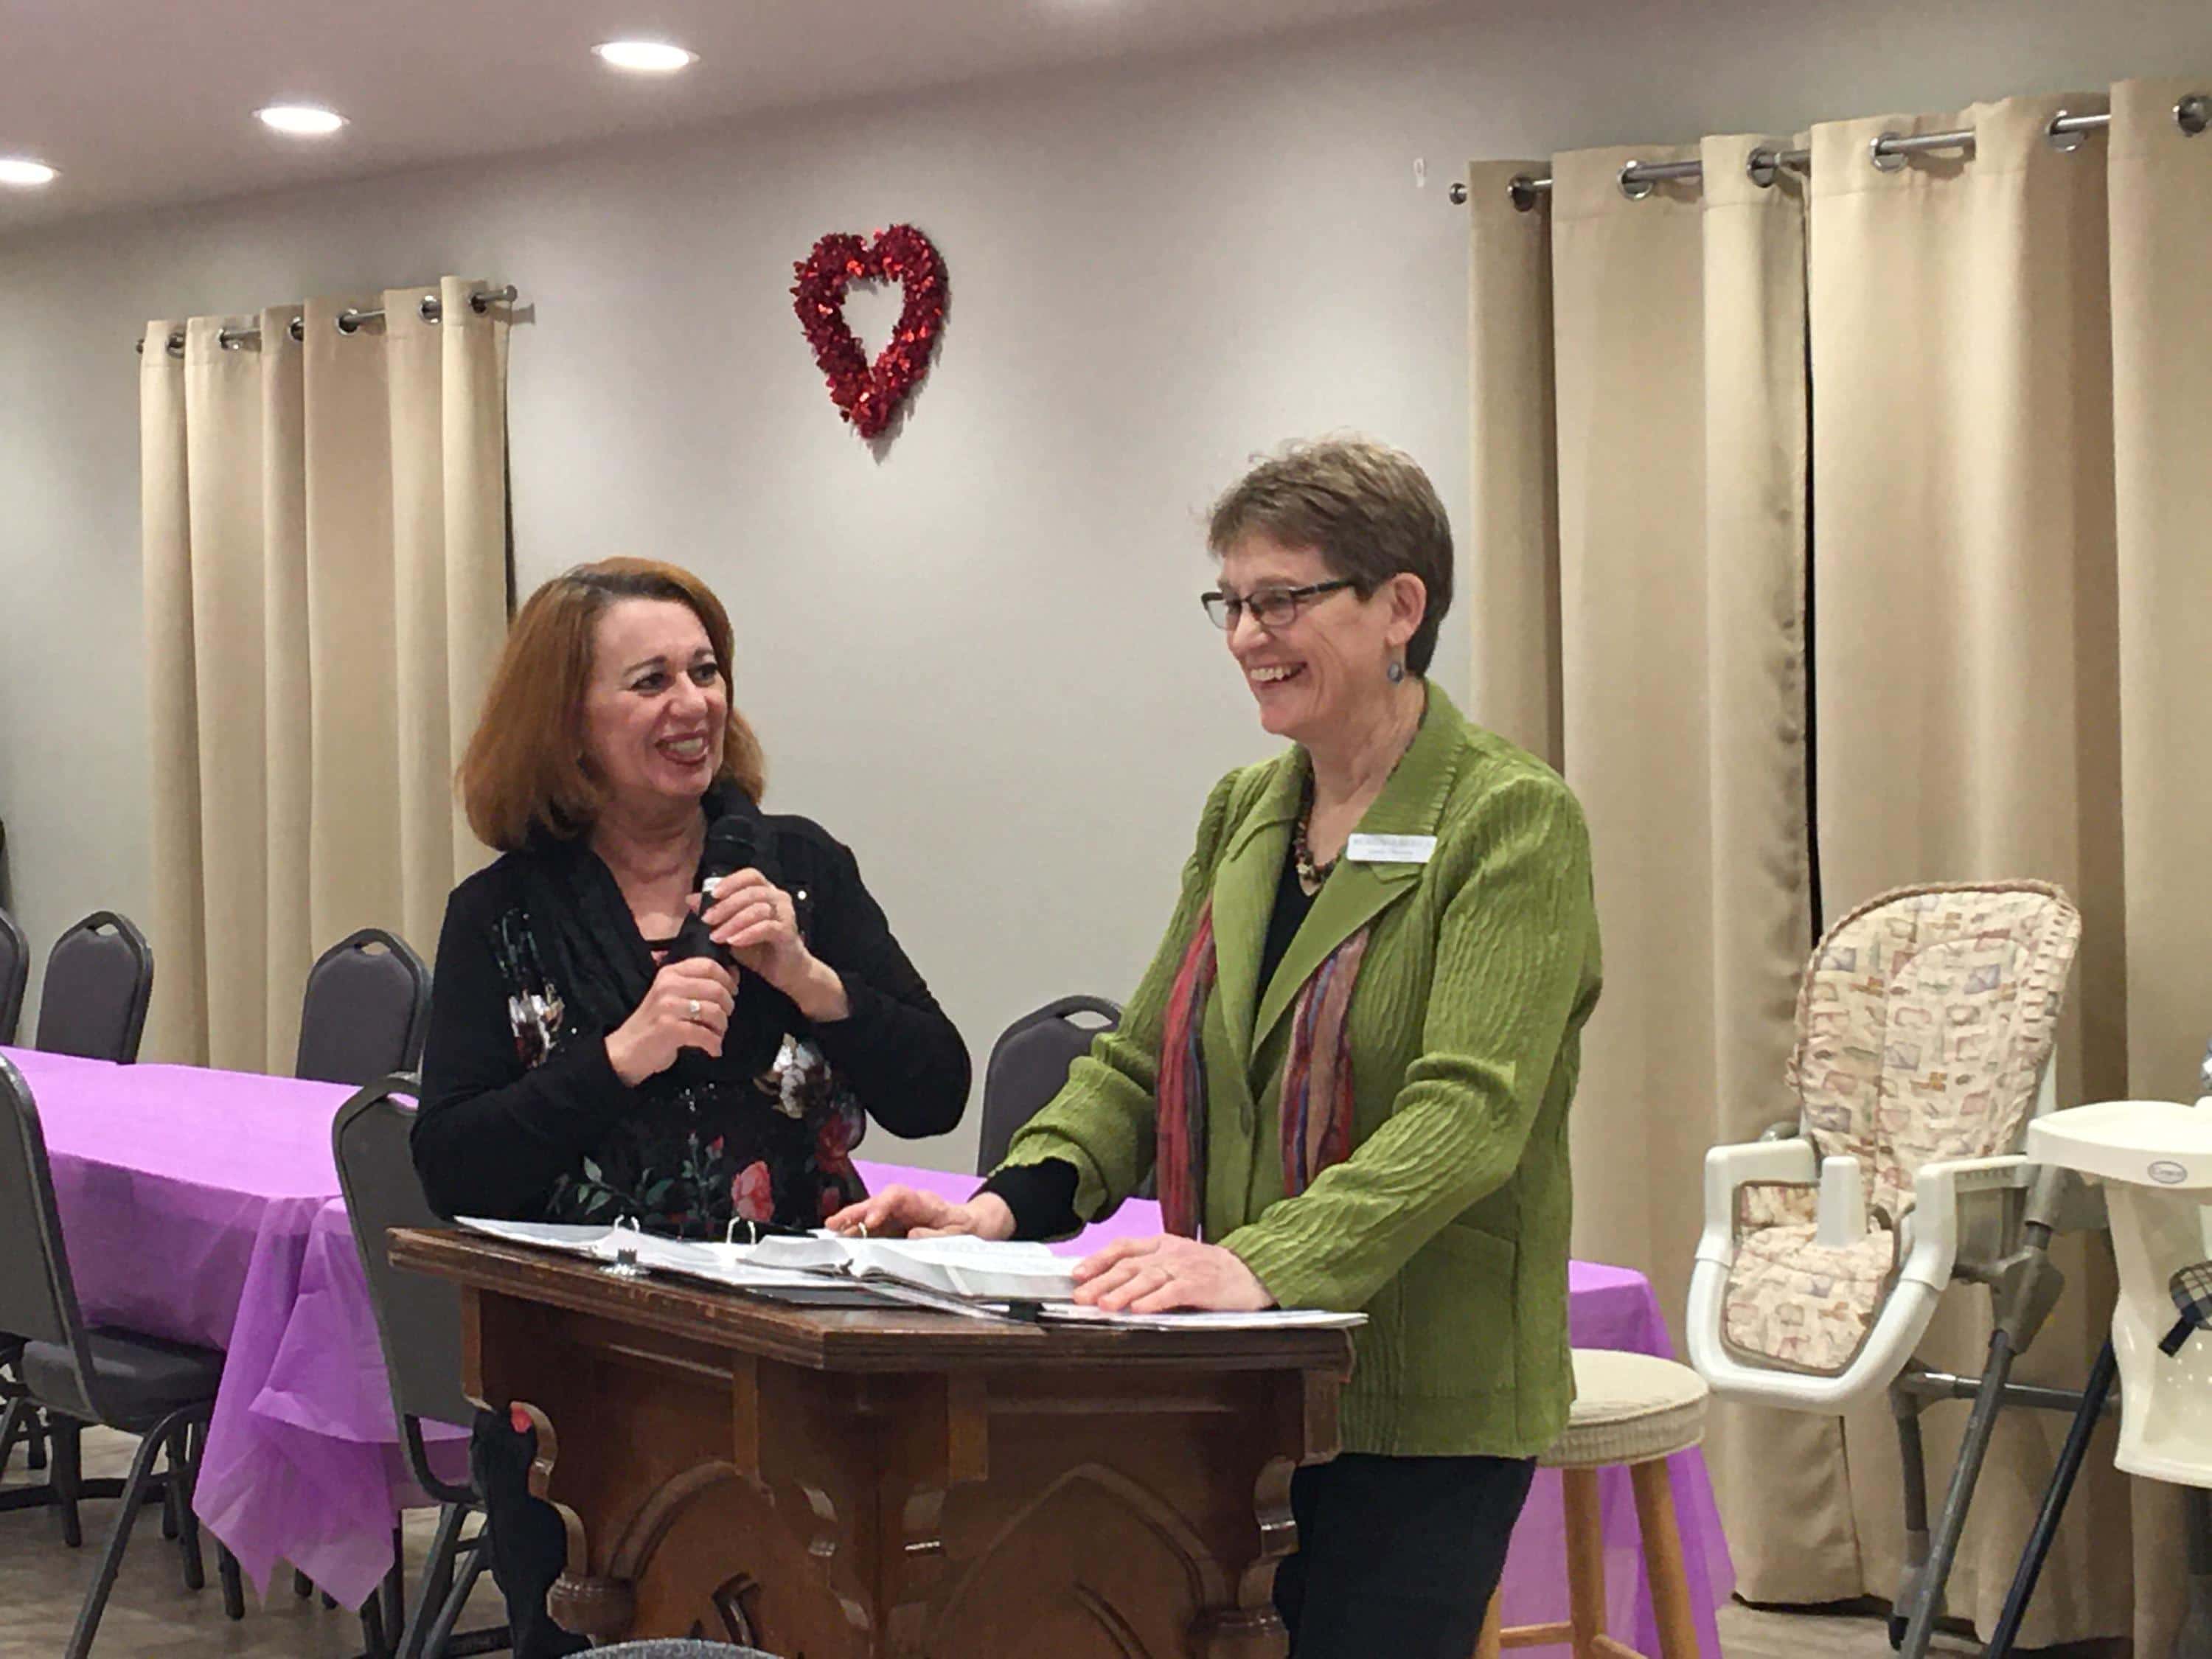 Coffee Talk Event in Cavalier – A Great Success!